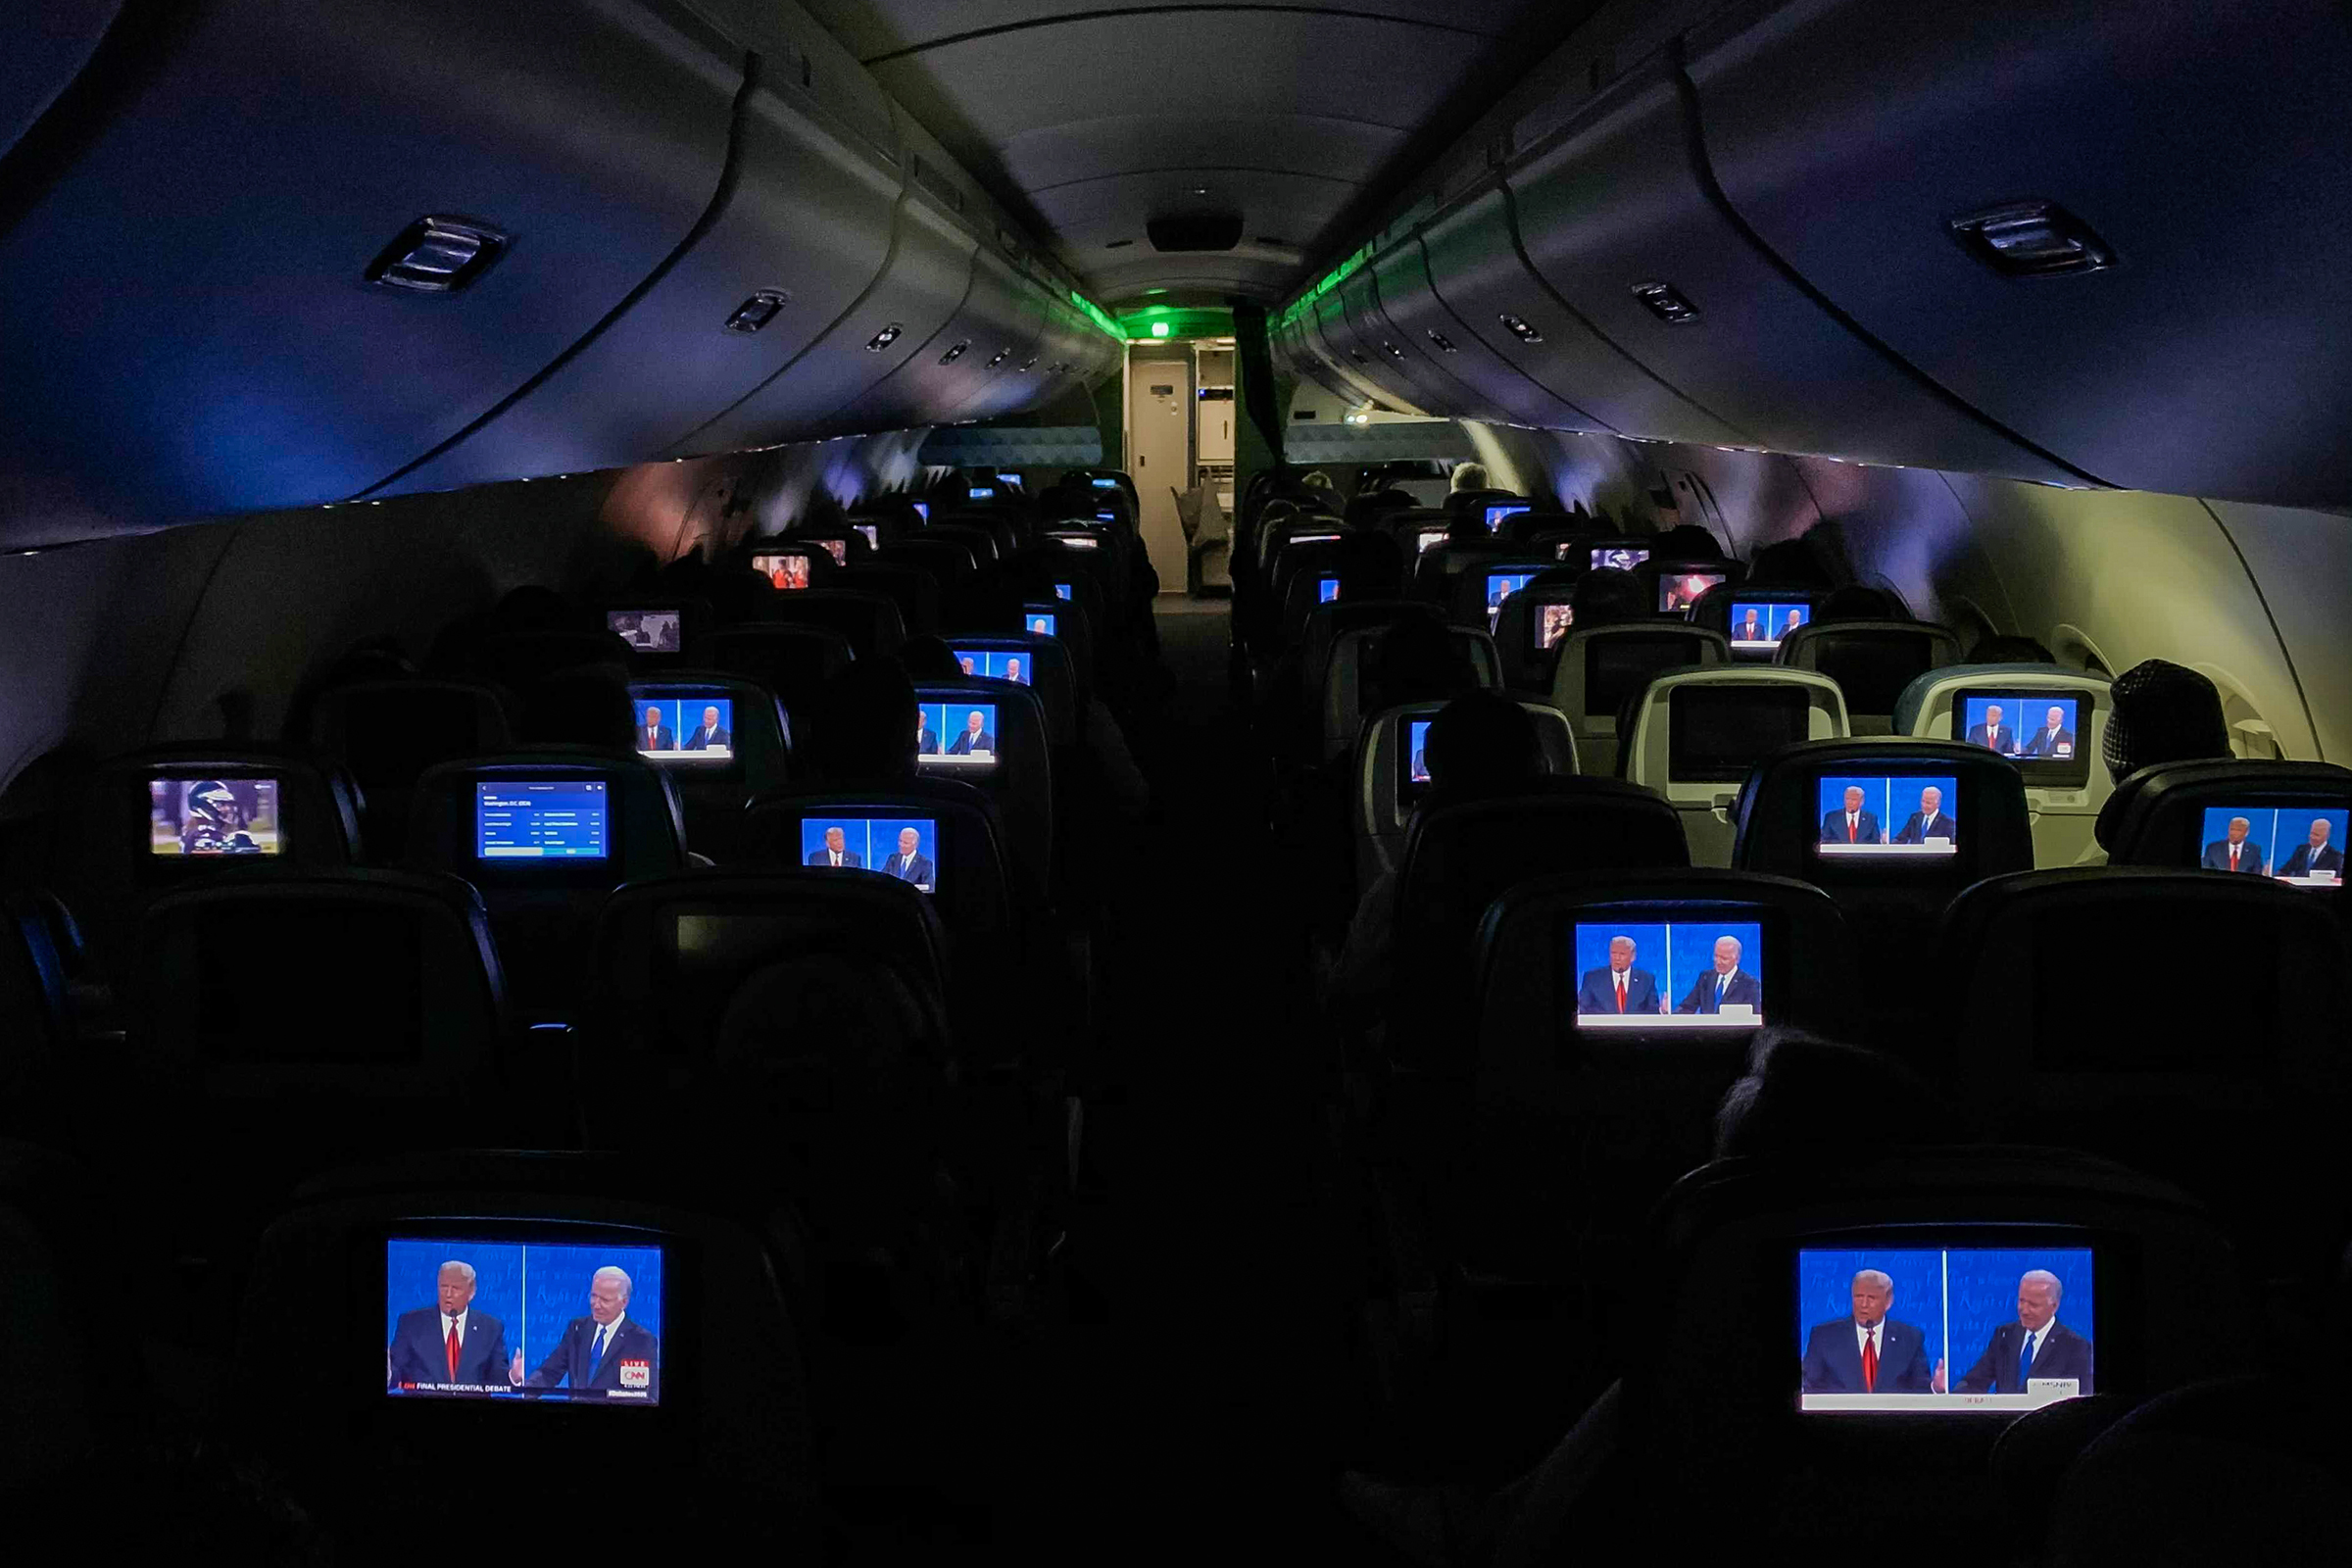 The final presidential debate between President Trump and Joe Biden appears on television screens during a flight from Detroit on Oct. 22, 2020.